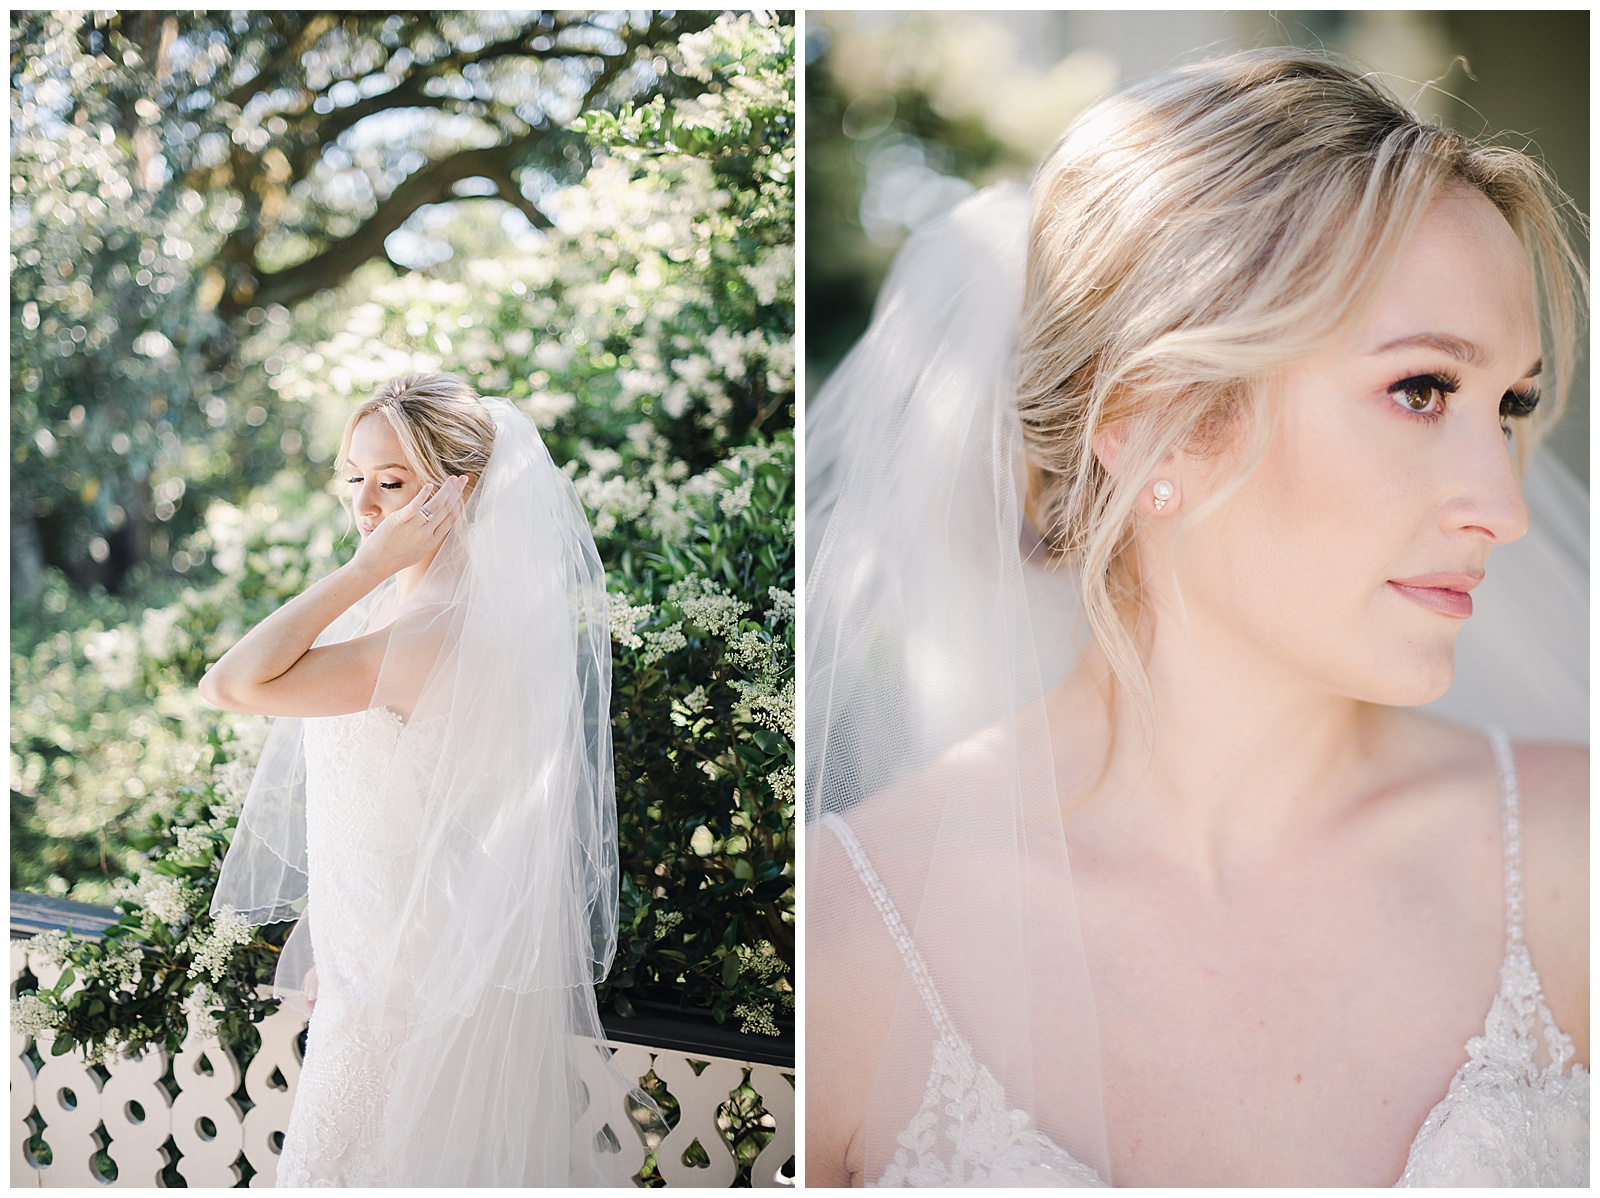 New Orleans Wedding Photographer Chelsea Rousey Photography Smiling bride in wedding gown and veil